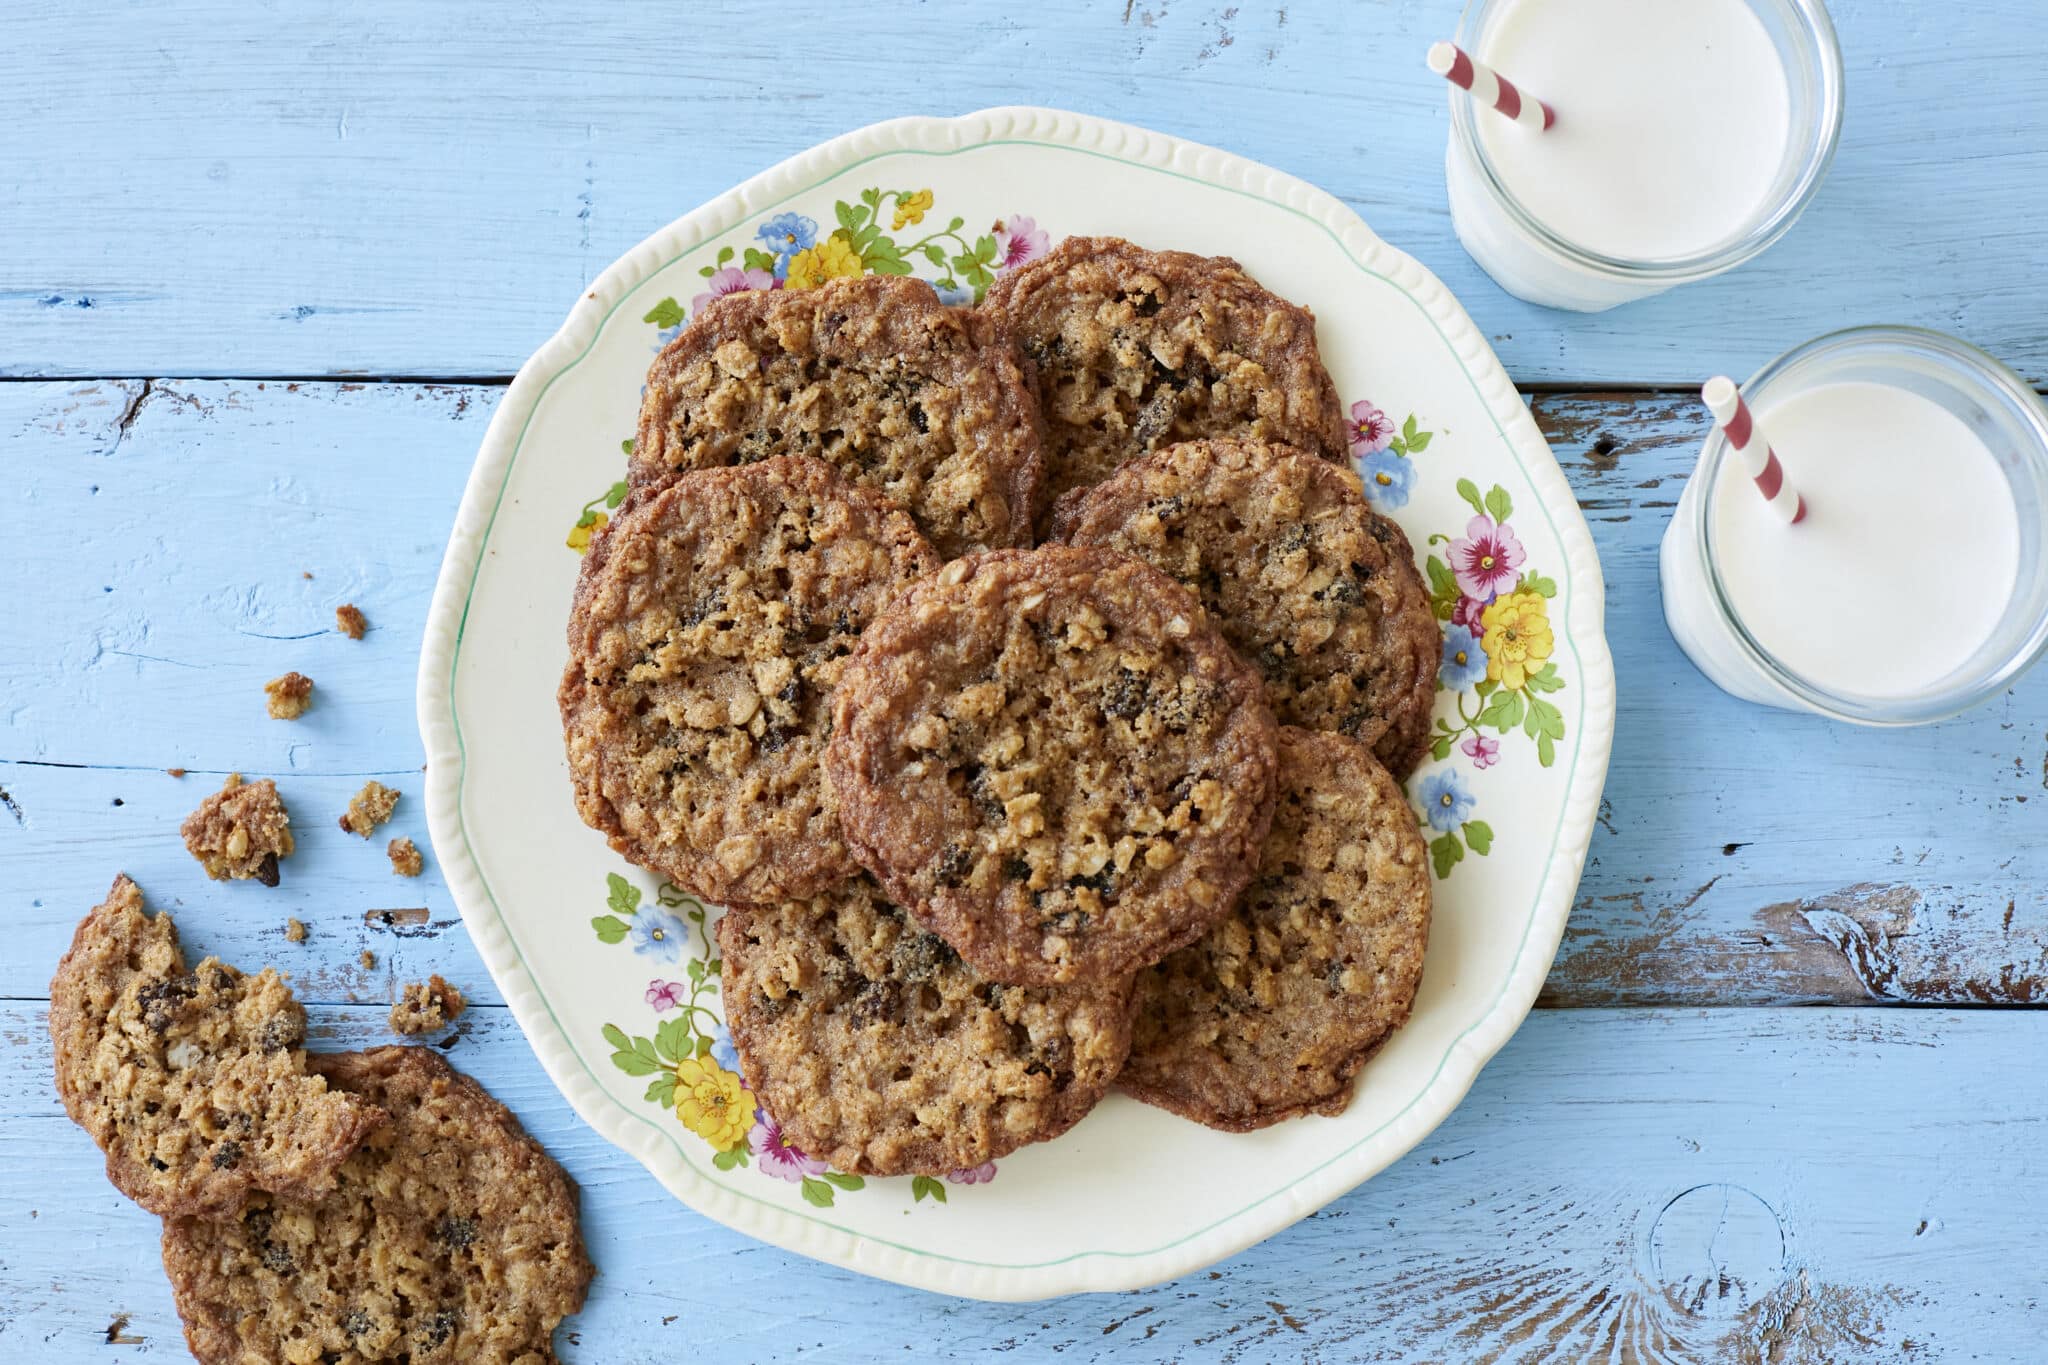 Crispy, chewy Almond Flour Cinnamon Raisin Cookies are served on a big platter with two glasses of milk.